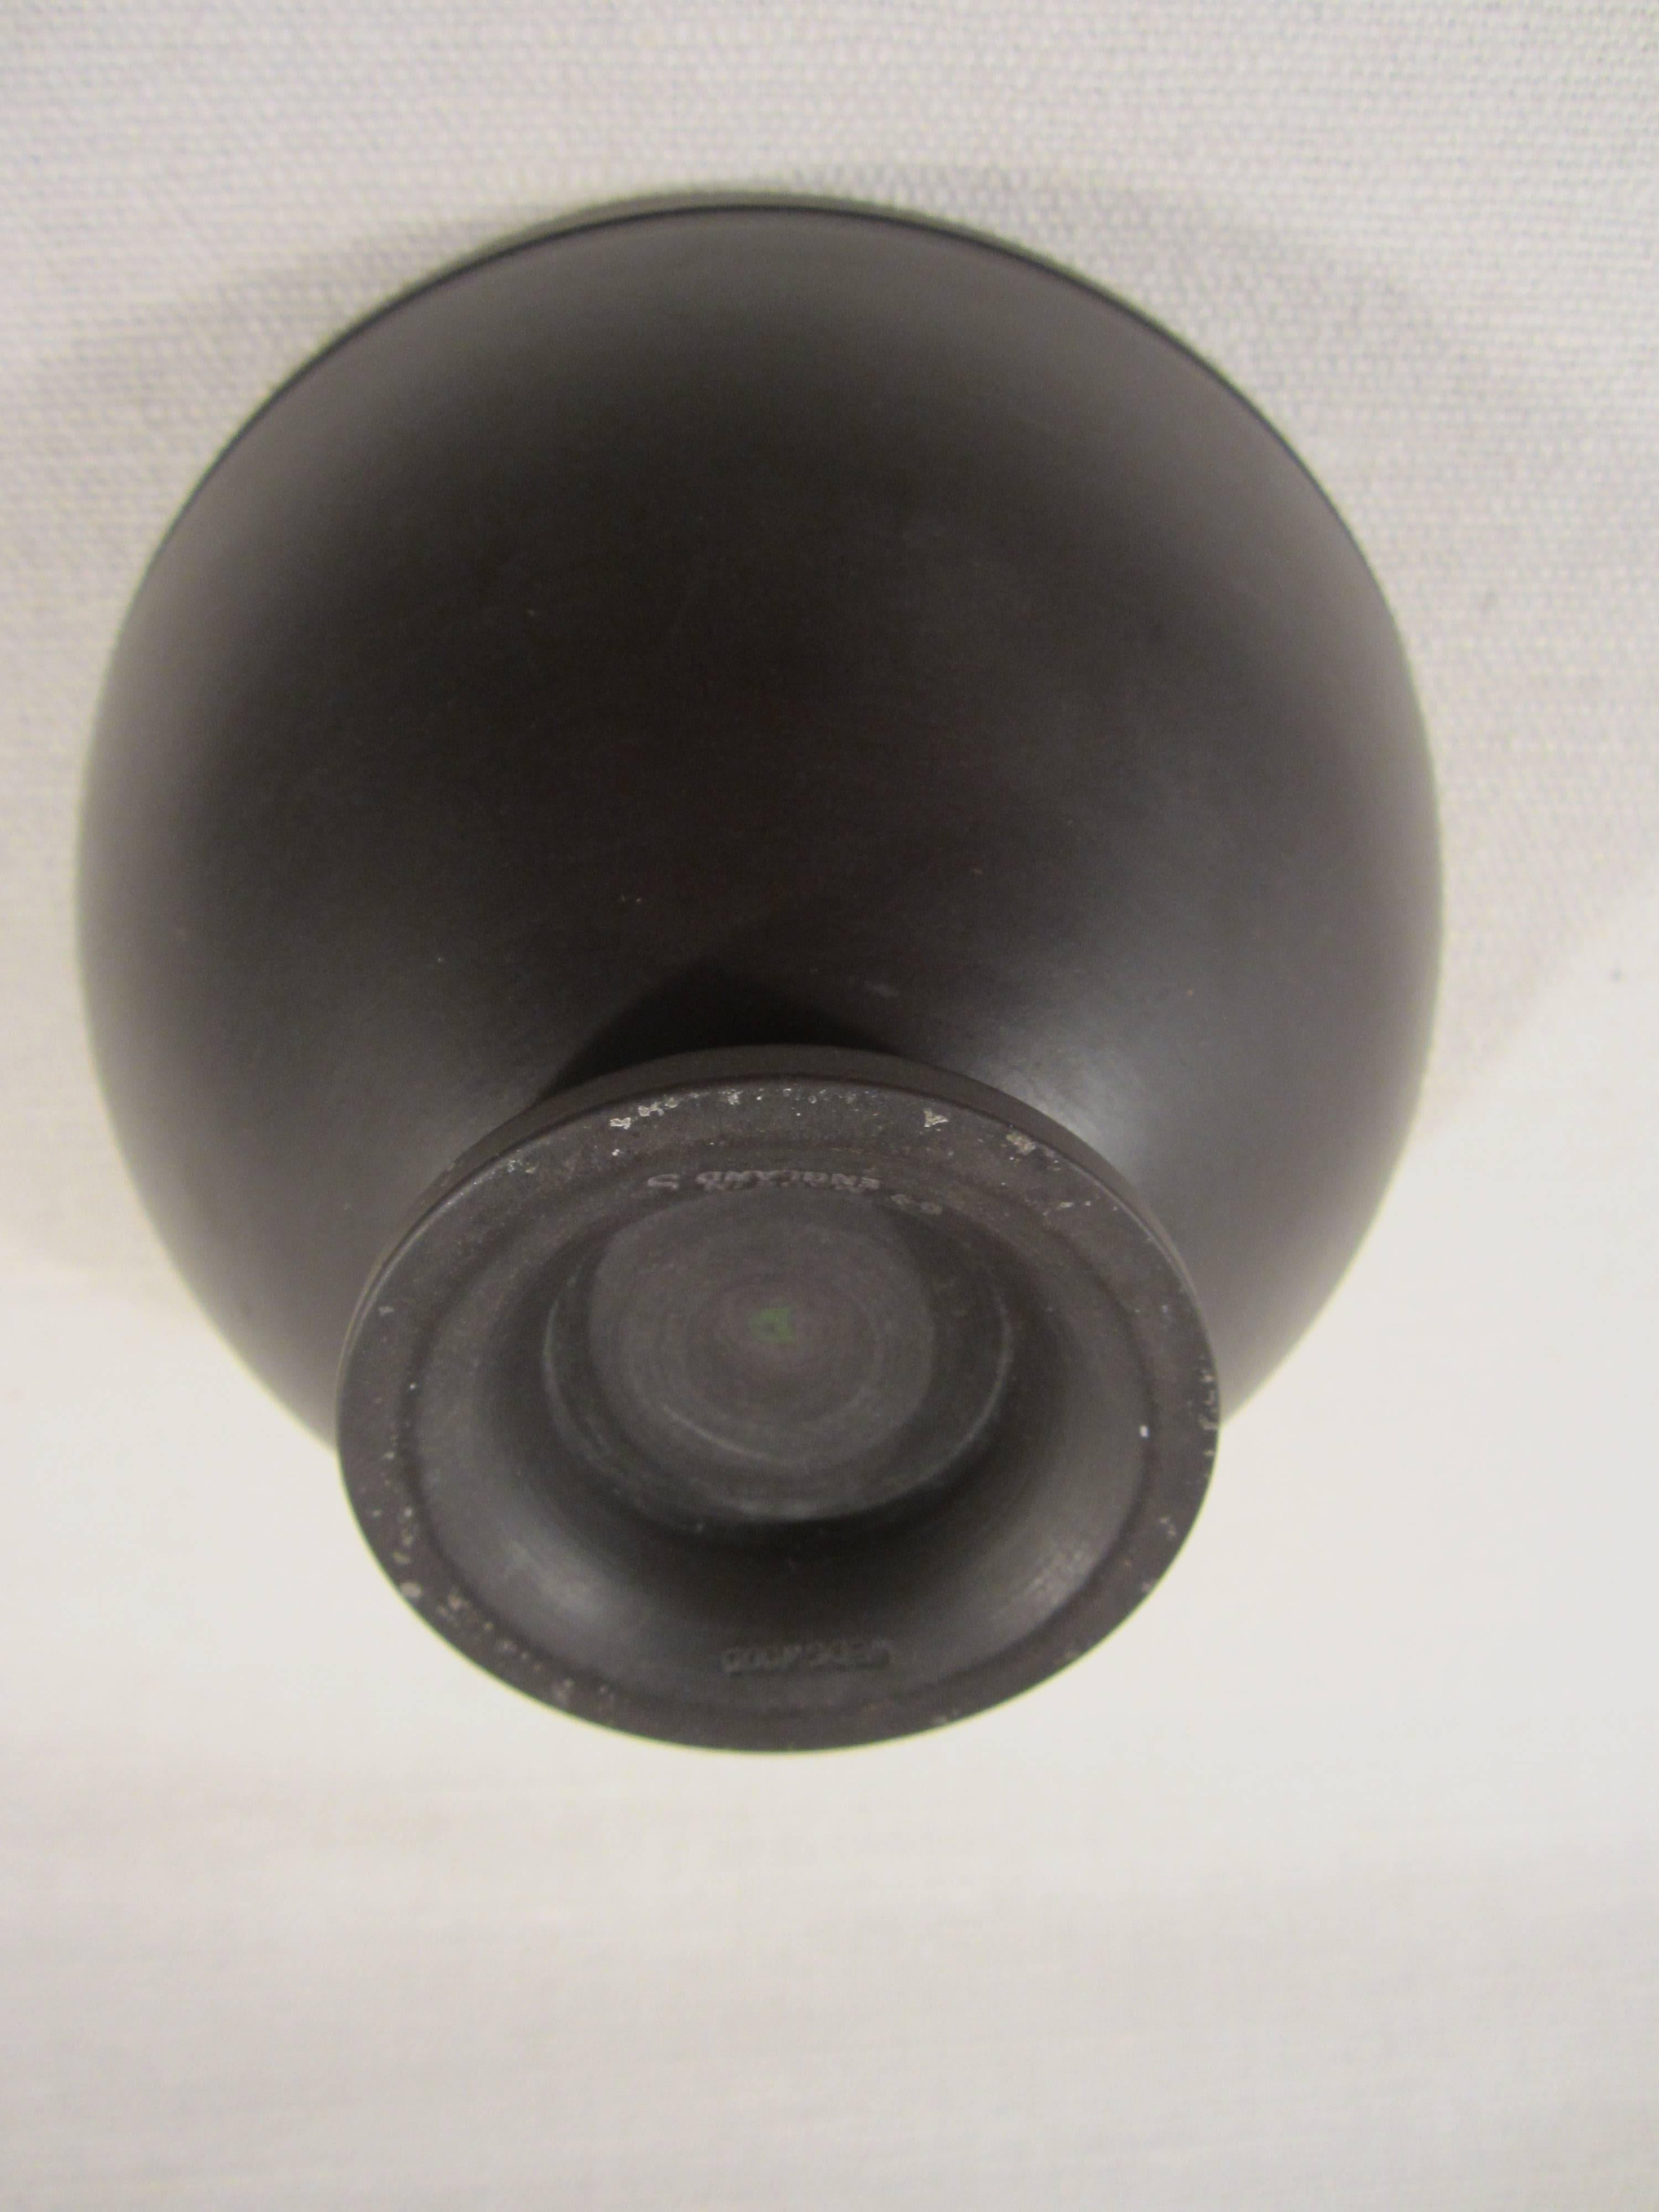 Basalt Wedgwood bowl.

Marks: "Wedgwood", "64 Made in England S, "D" by Keith Murray.